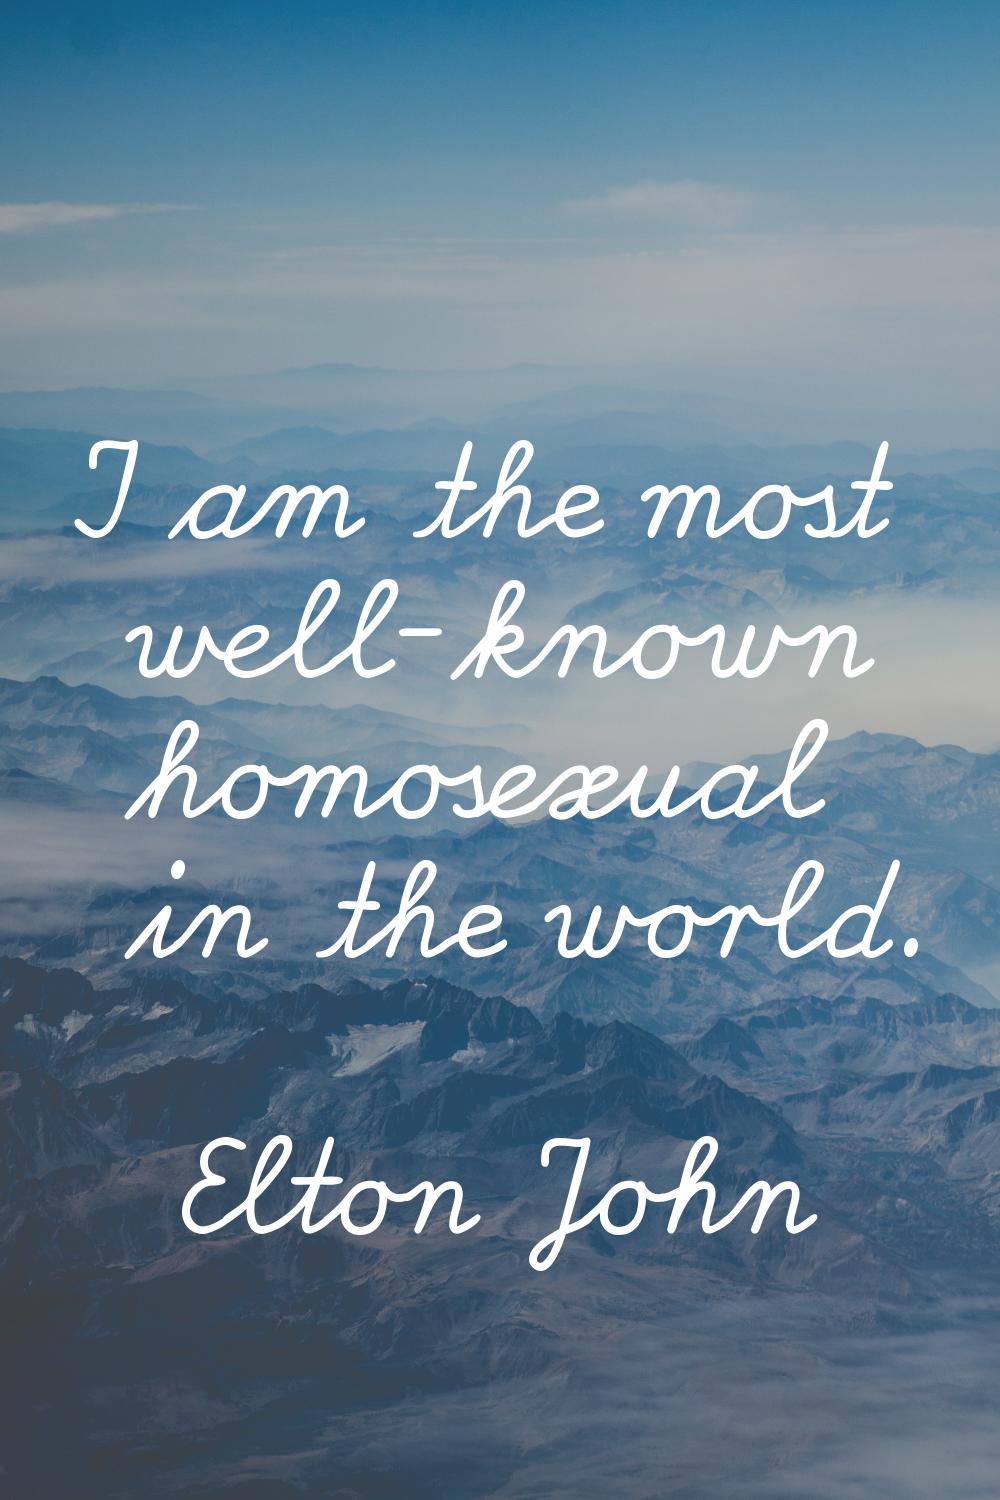 I am the most well-known homosexual in the world.